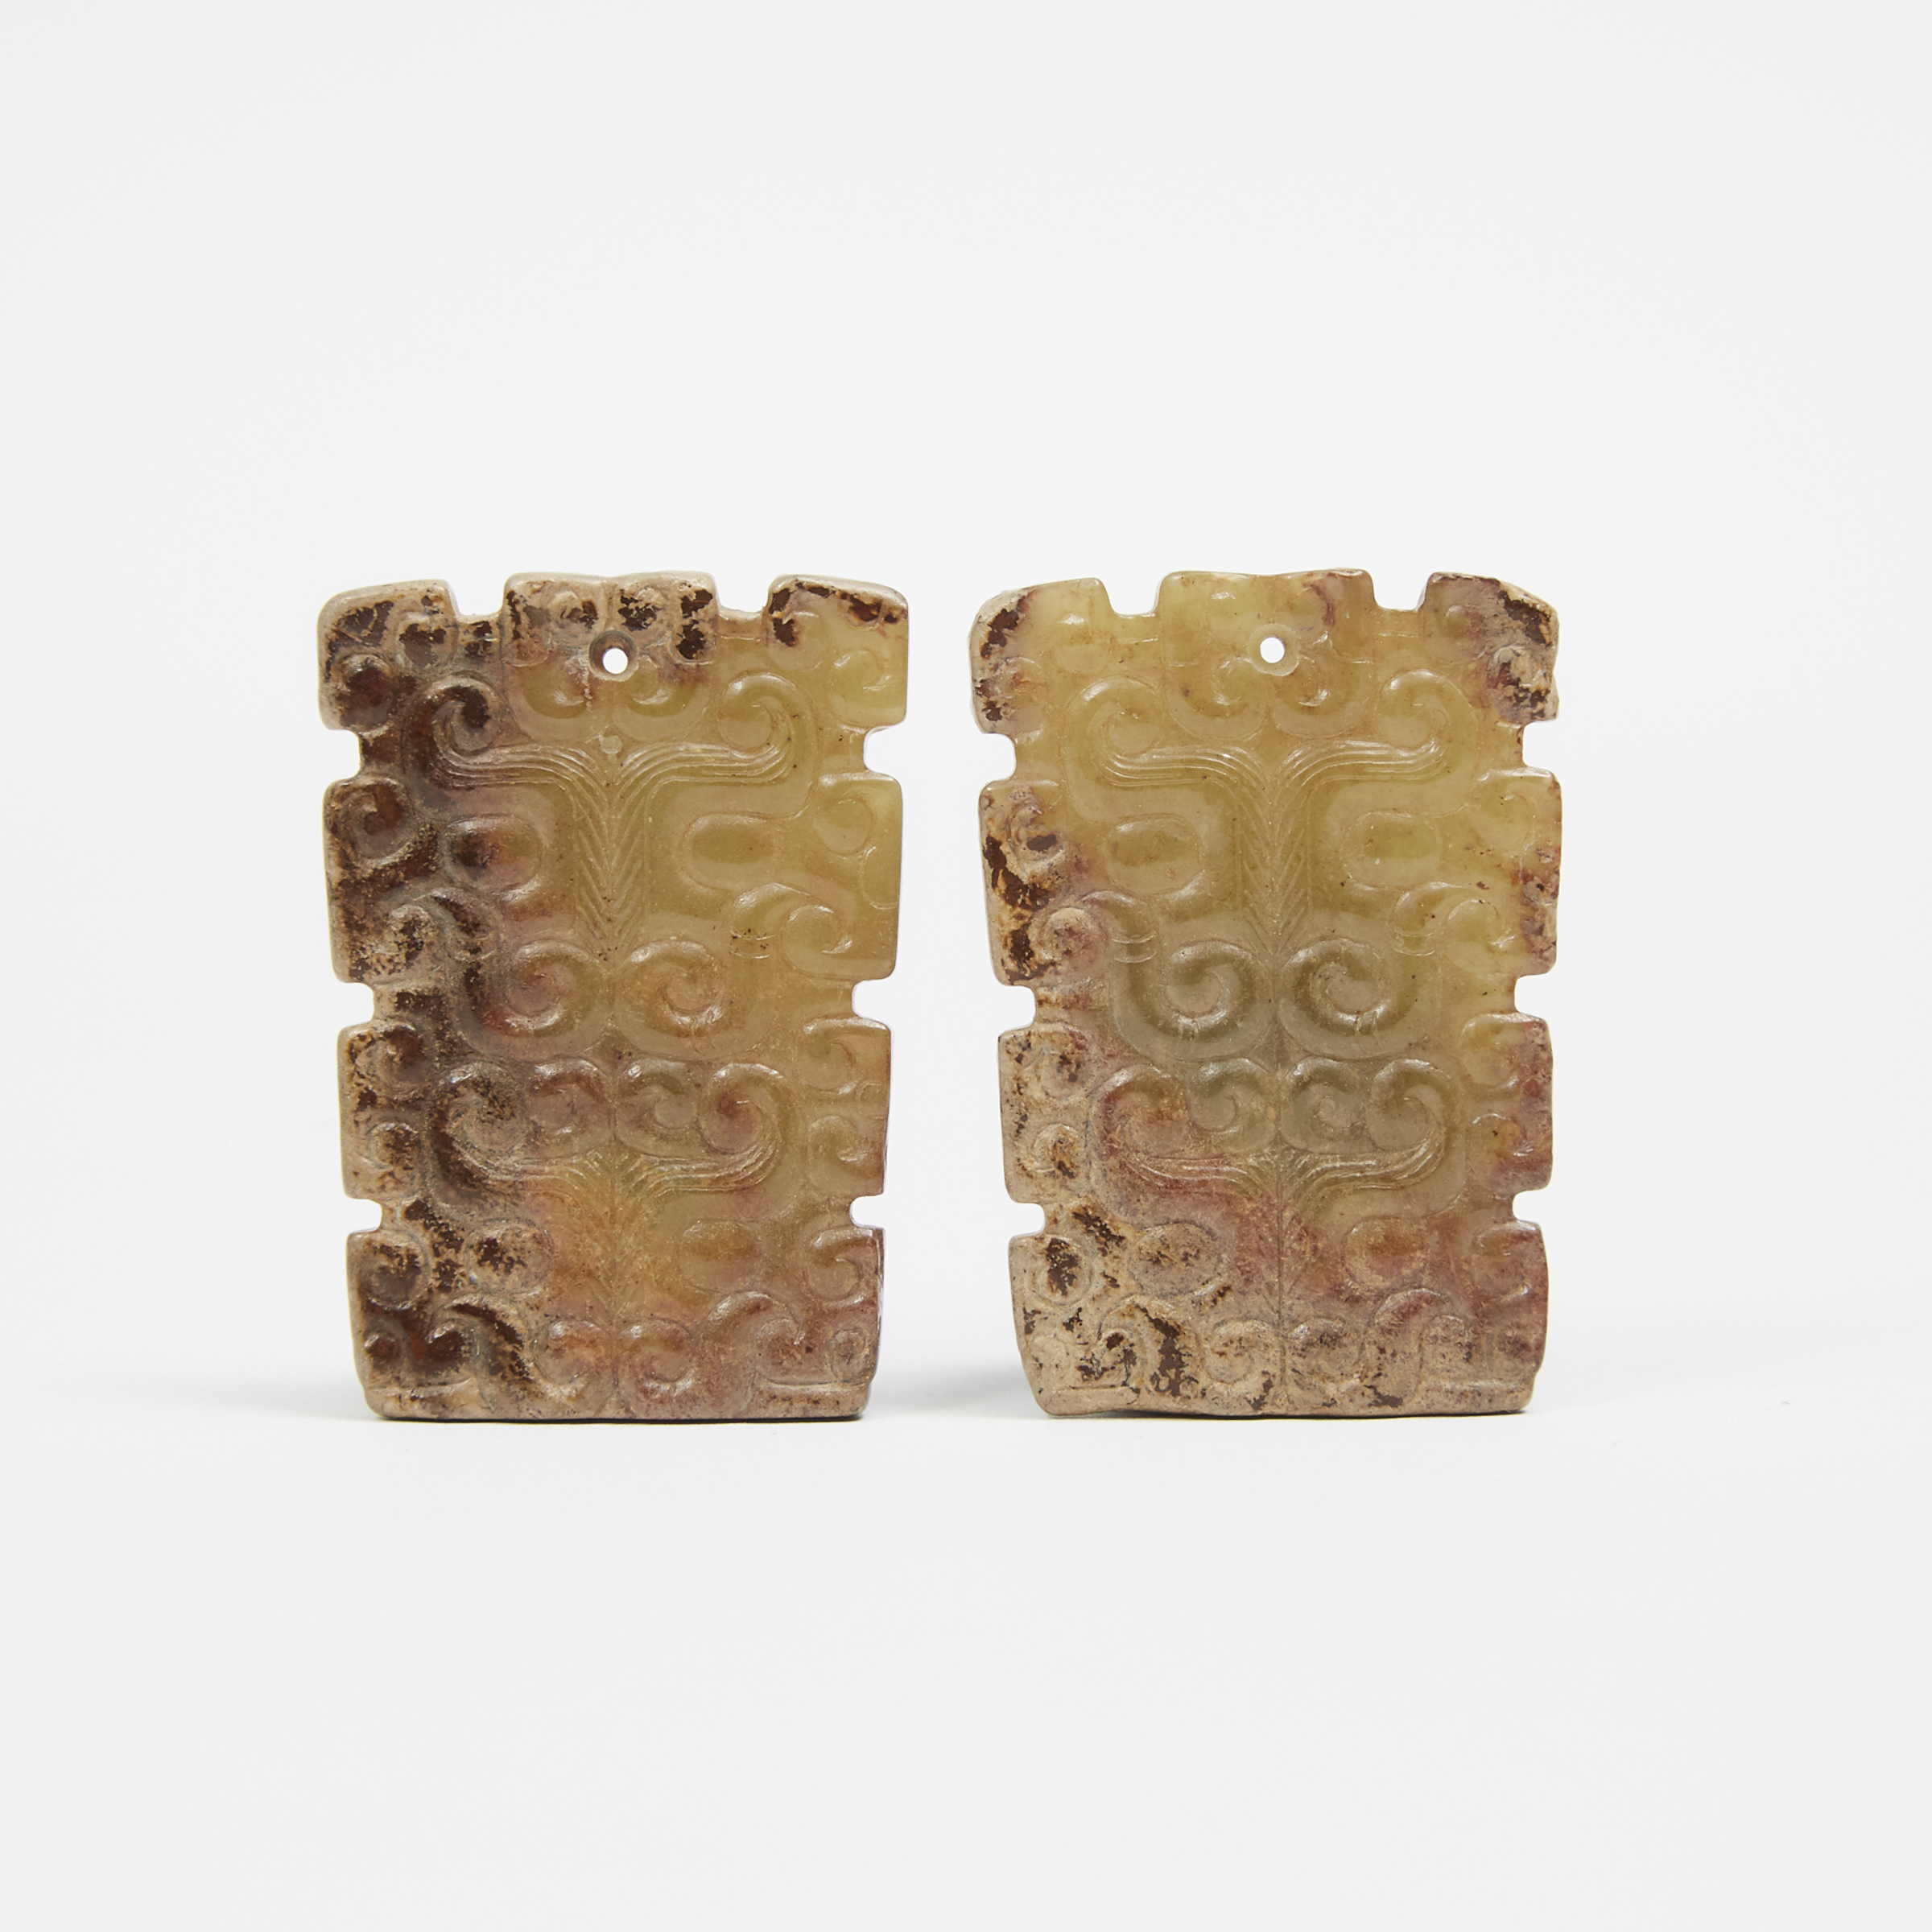 Two Archaic-Style Celadon and Russet Stone Carved Pendants with Taotie Mask Designs